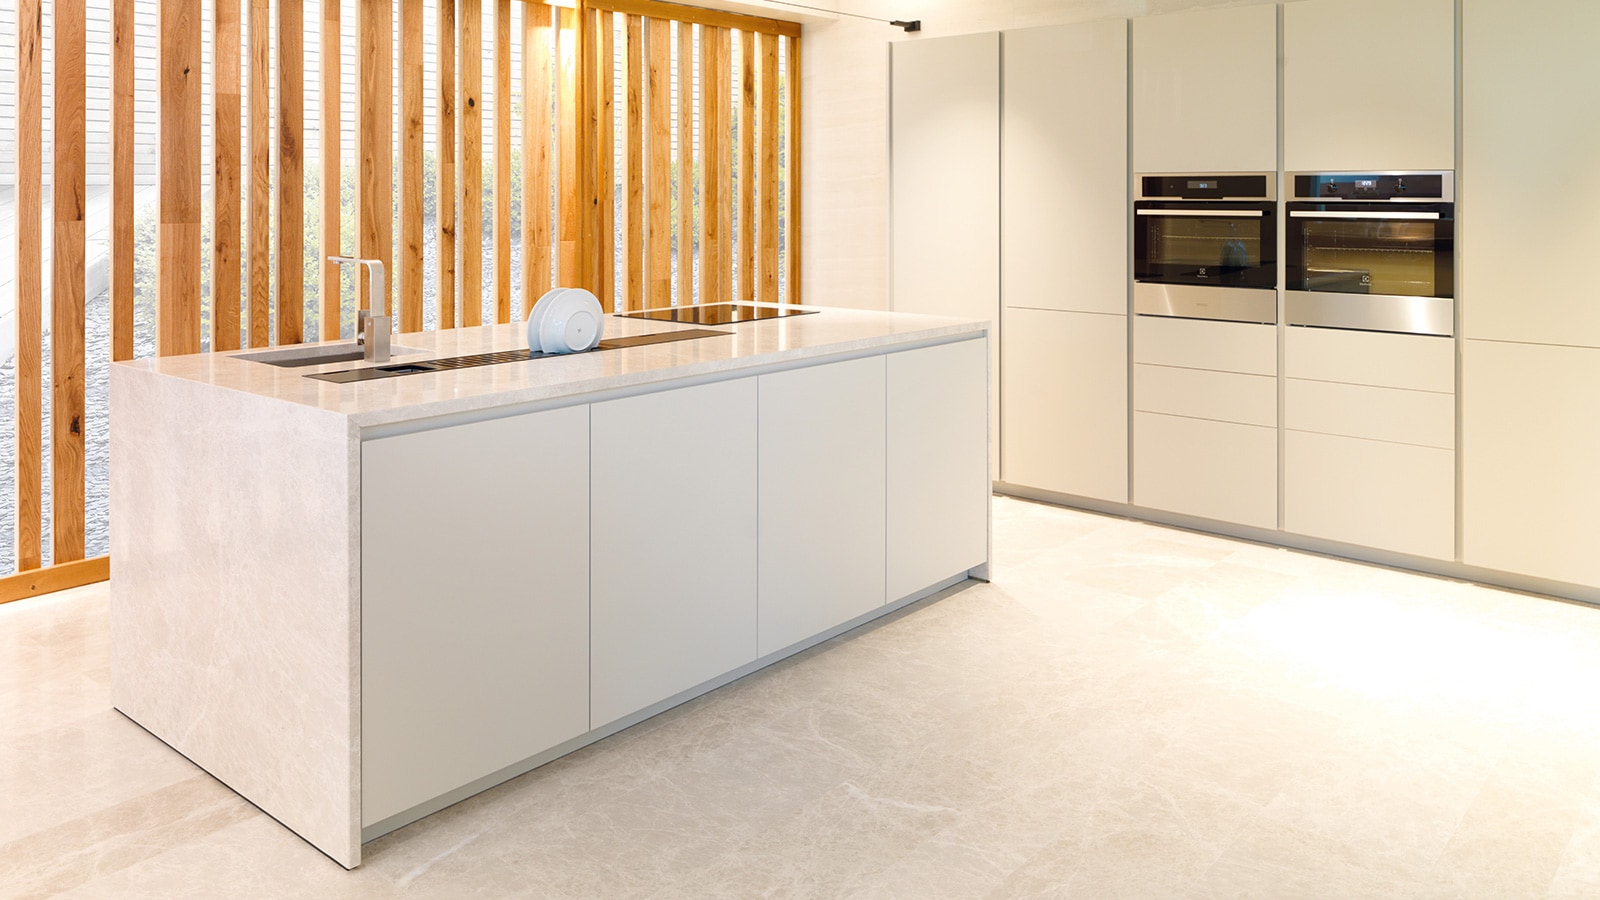 The new Emotions kitchen by Porcelanosa blends elegance with functionality